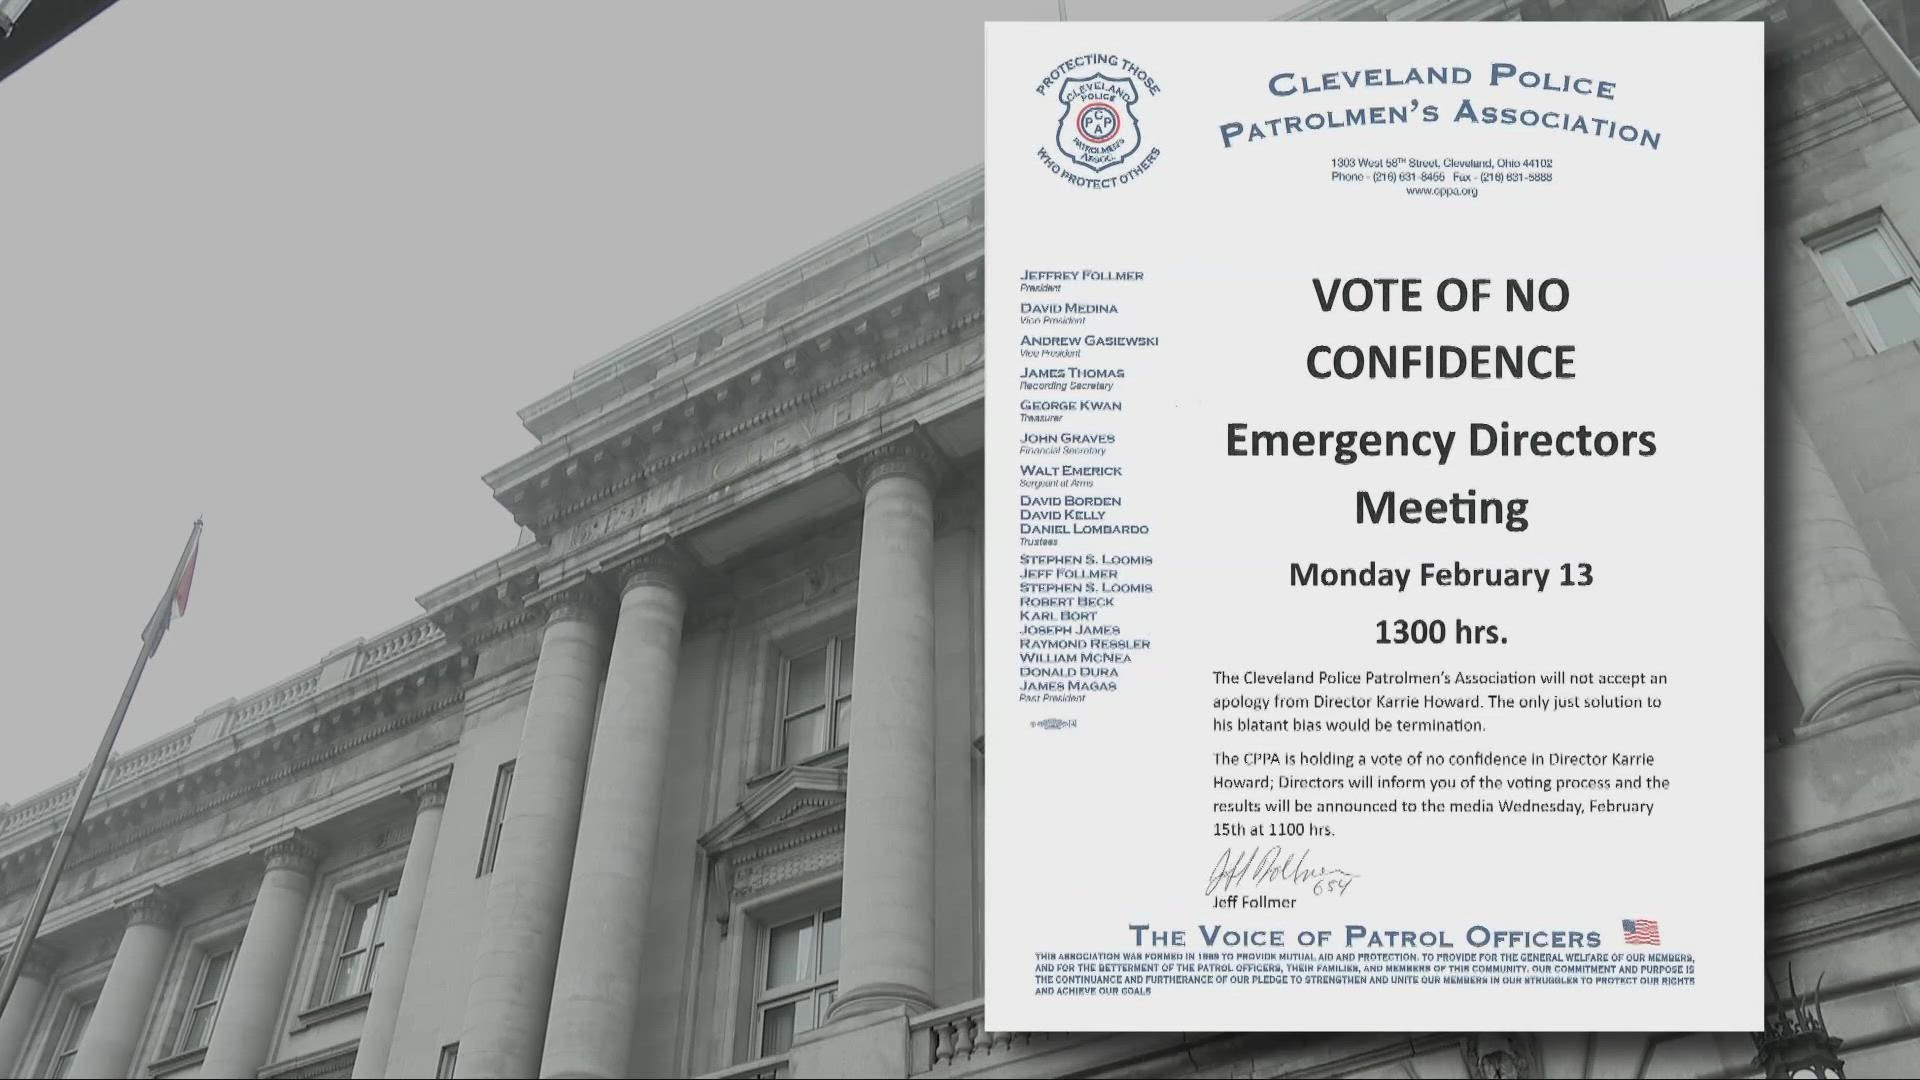 Monday's scheduled vote of no confidence comes after the union says Howard made "blatant bias" comments about the Irish history of the police department.